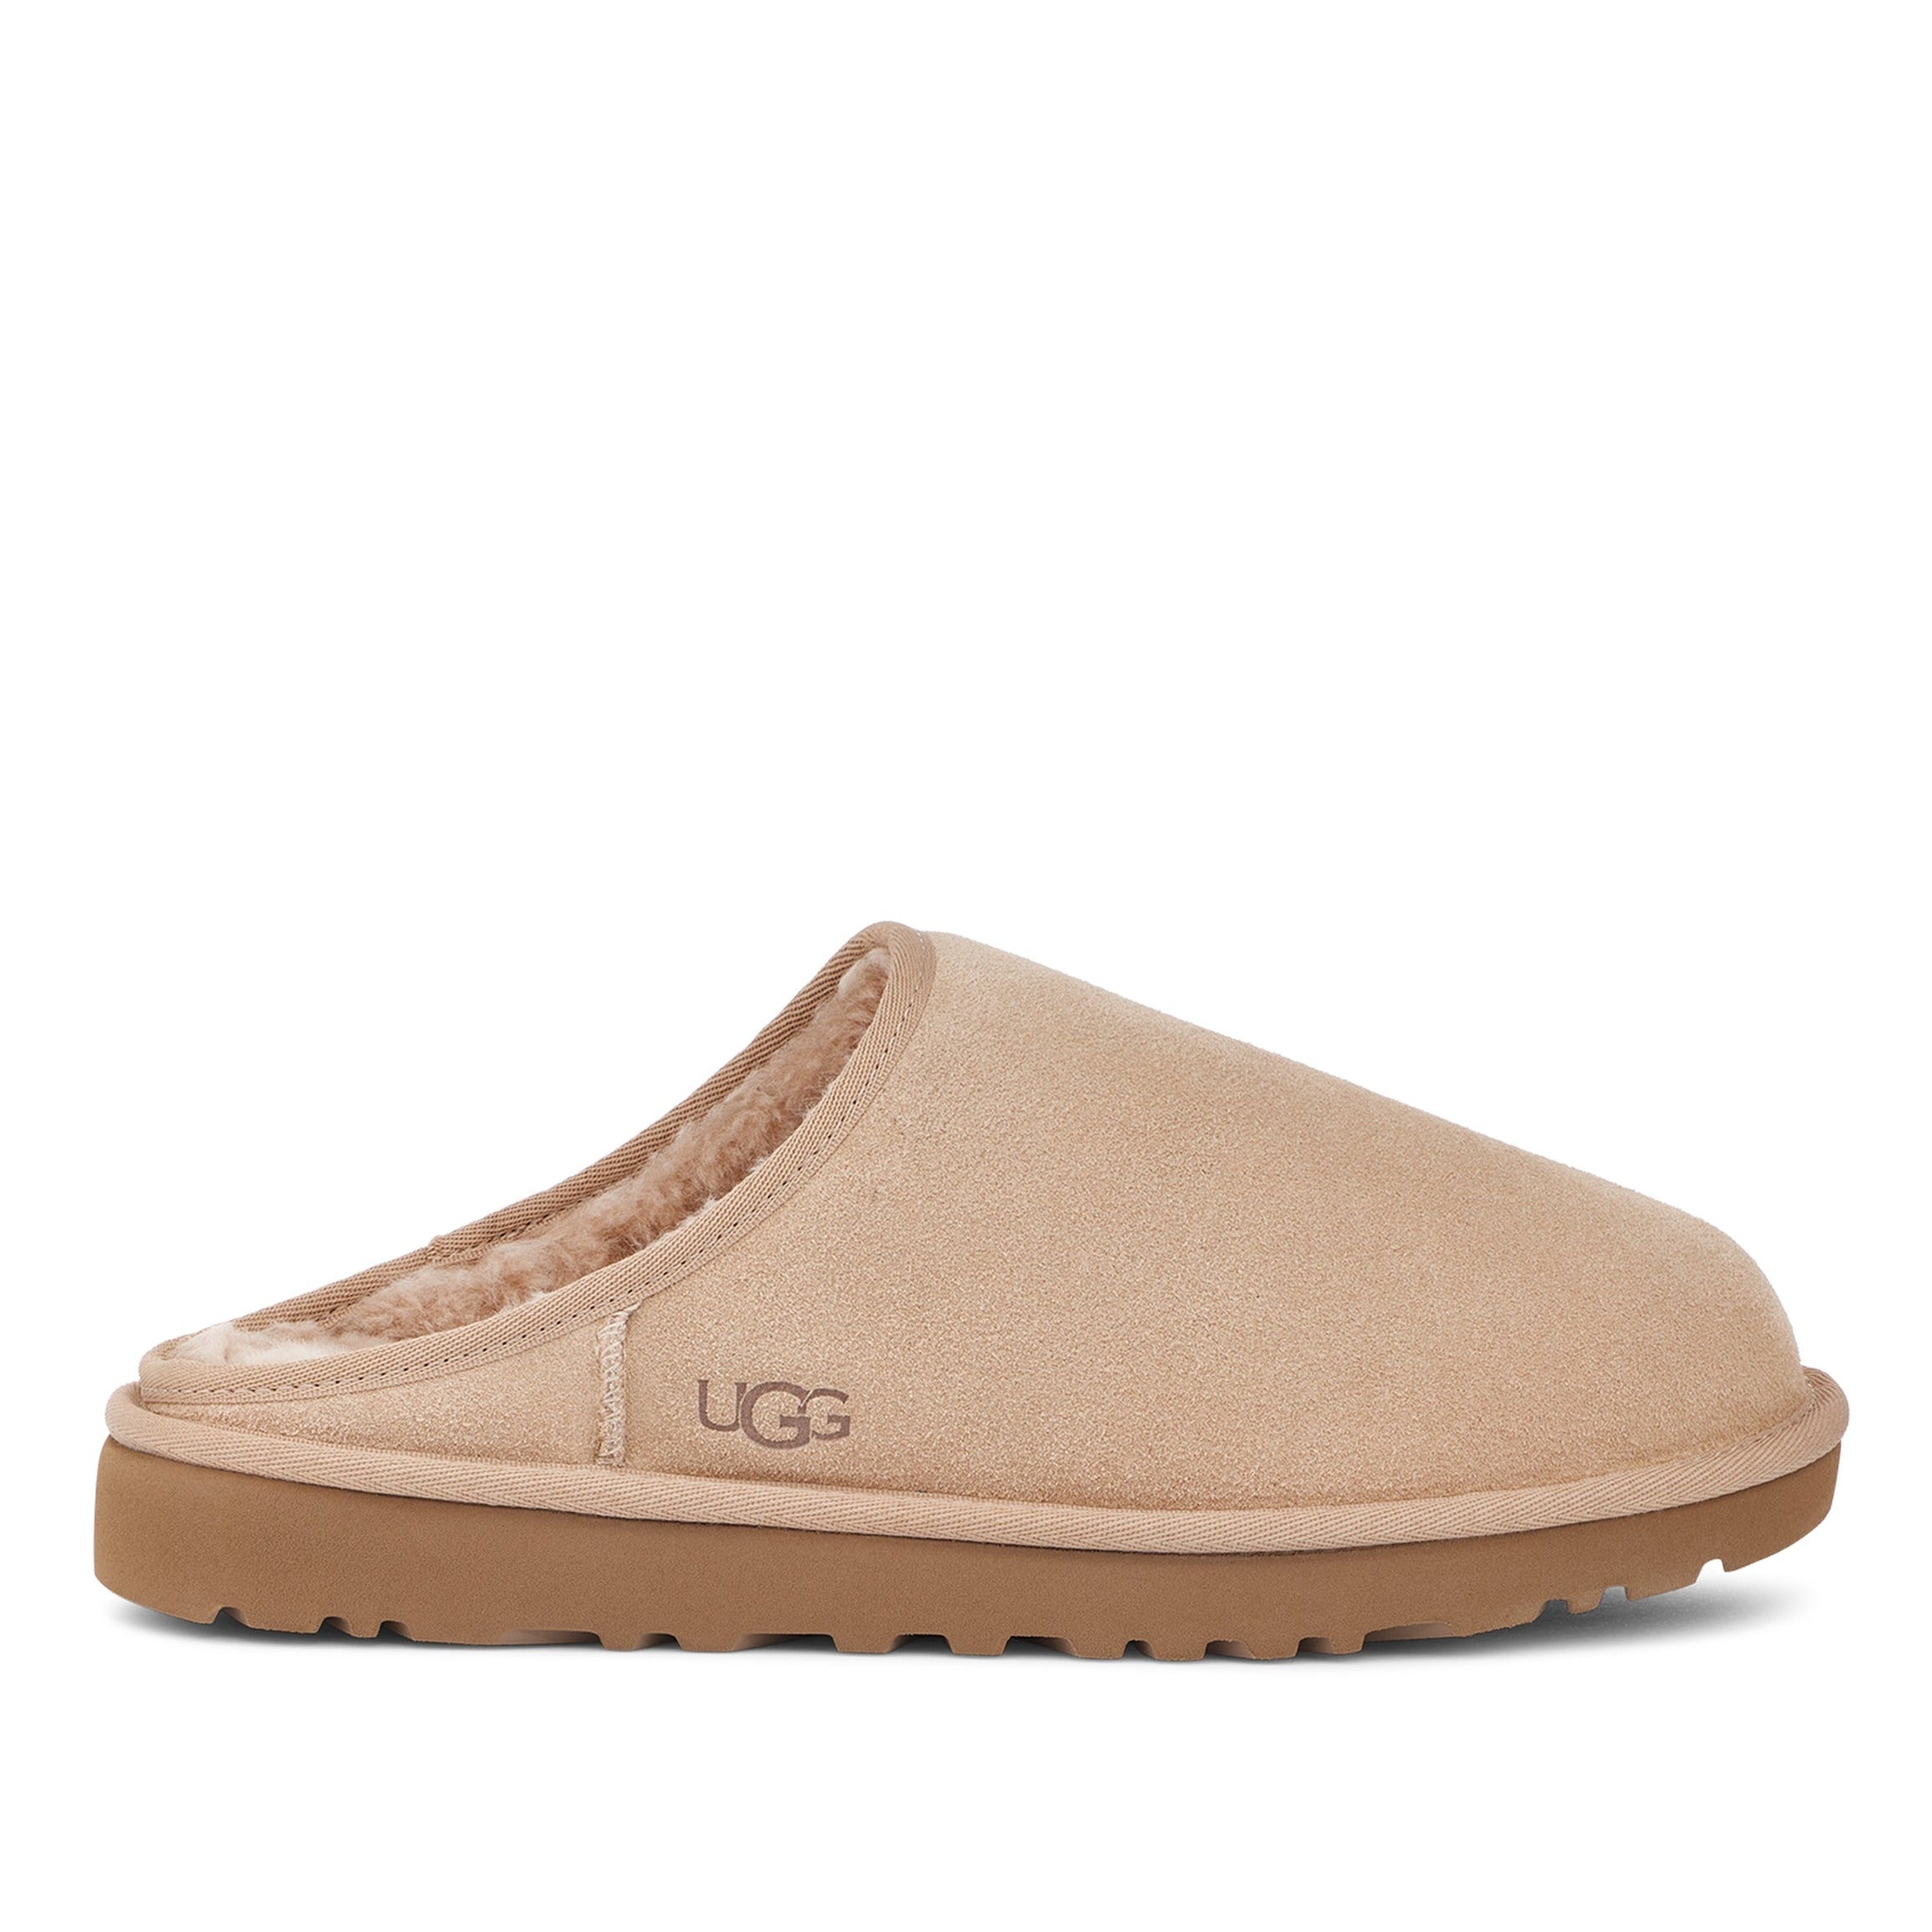 Sample UGG Classic Slip-On Slippers Suede Sand 8 